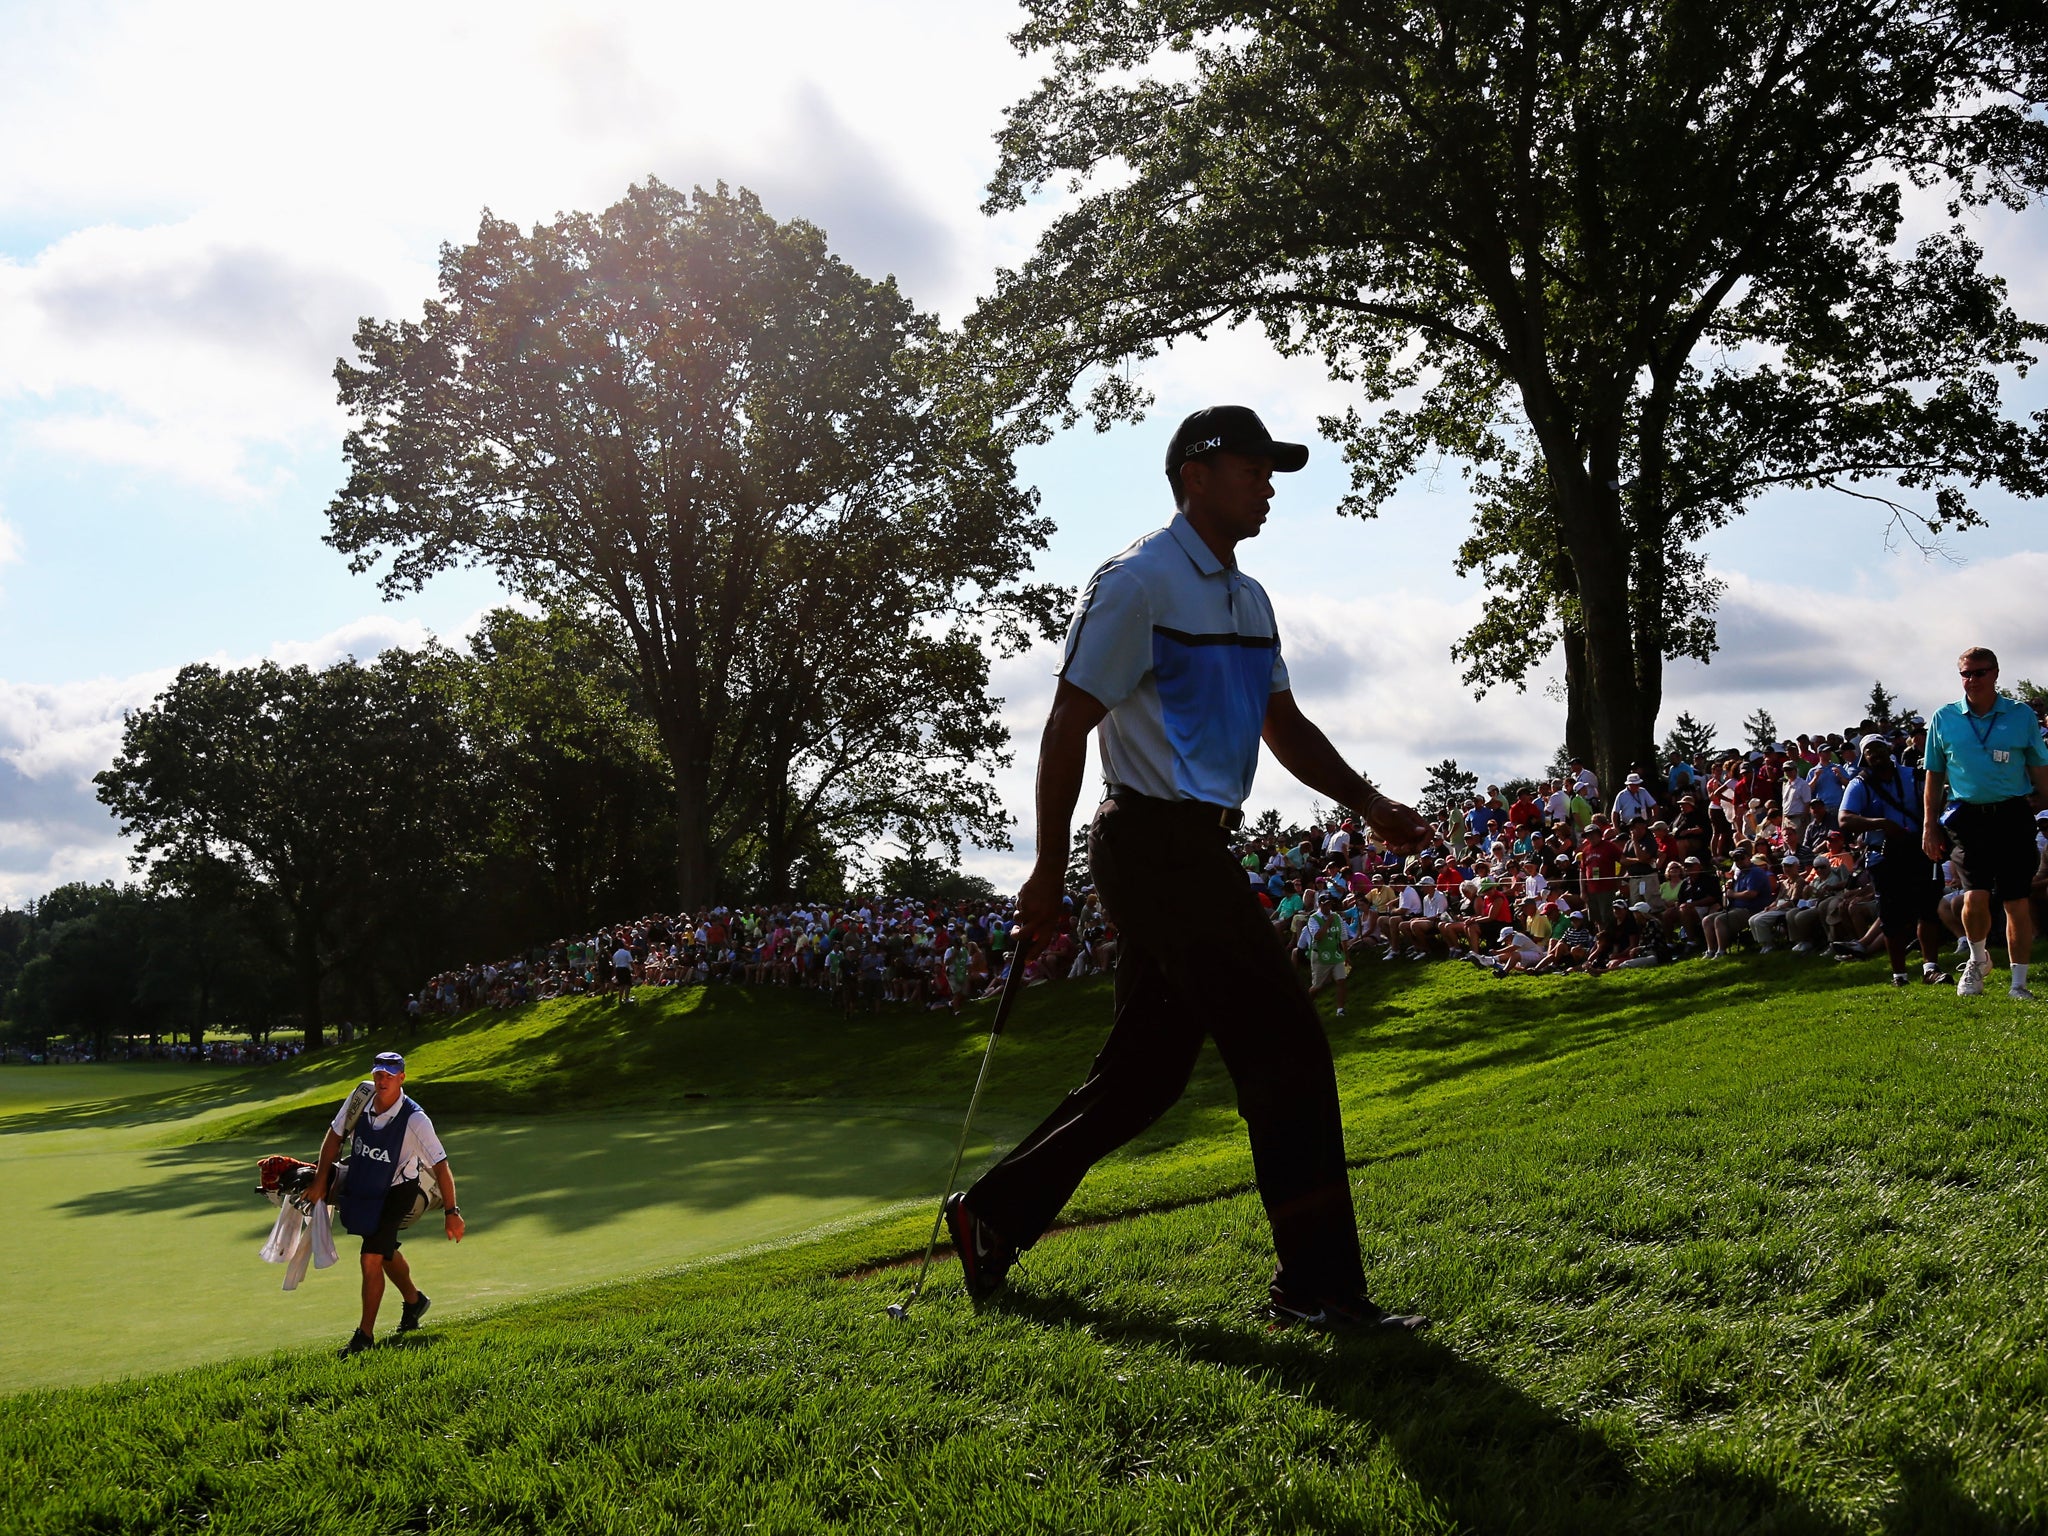 Tiger Woods begins his first round of the 2013 US PGA Championship